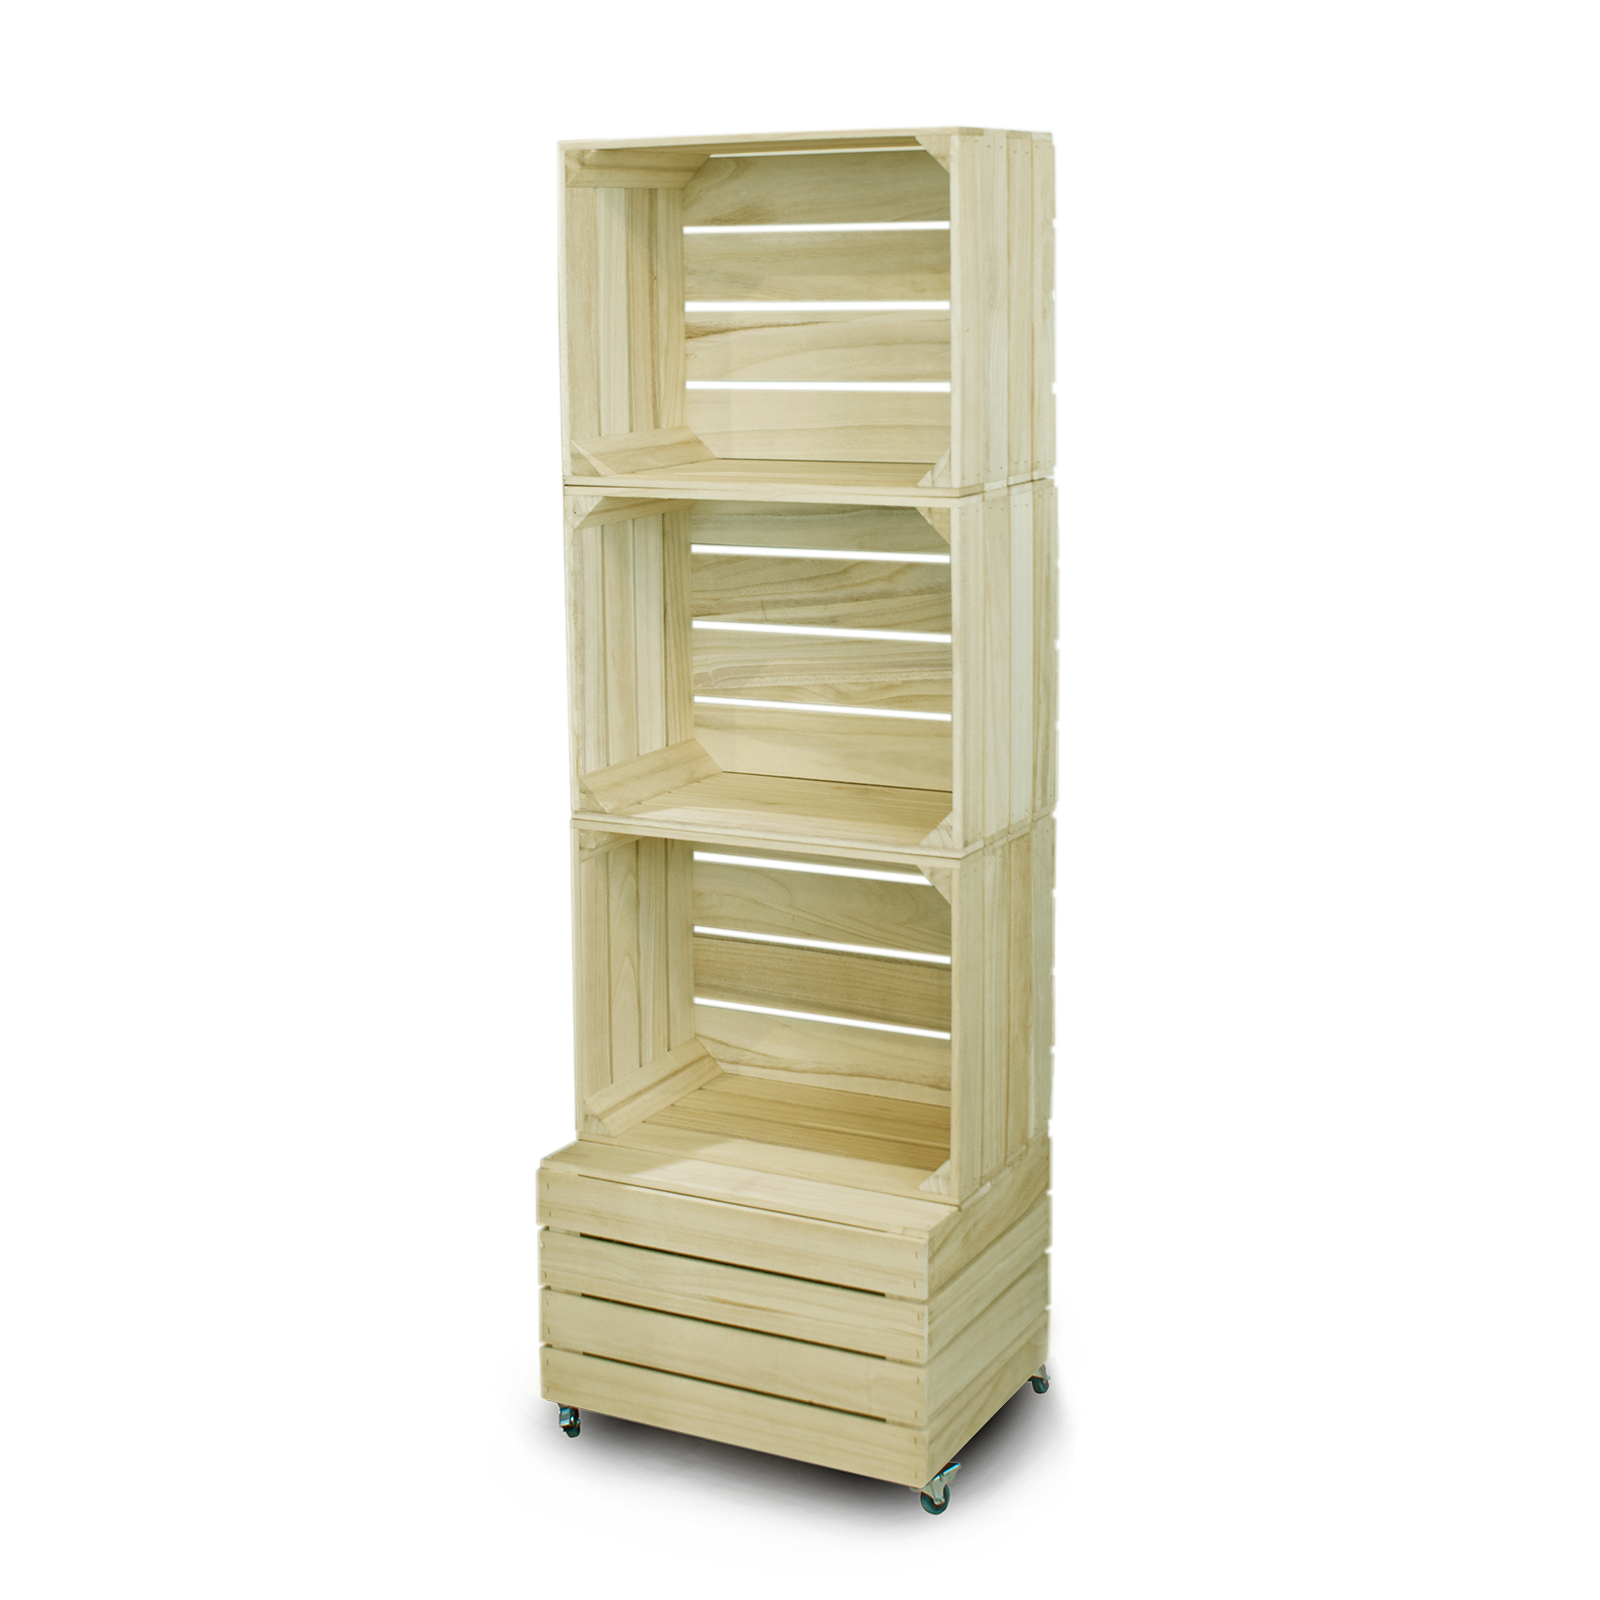 Crate Store - 4 Crate Square Shelving Display with Optional Base (CRATE/3)